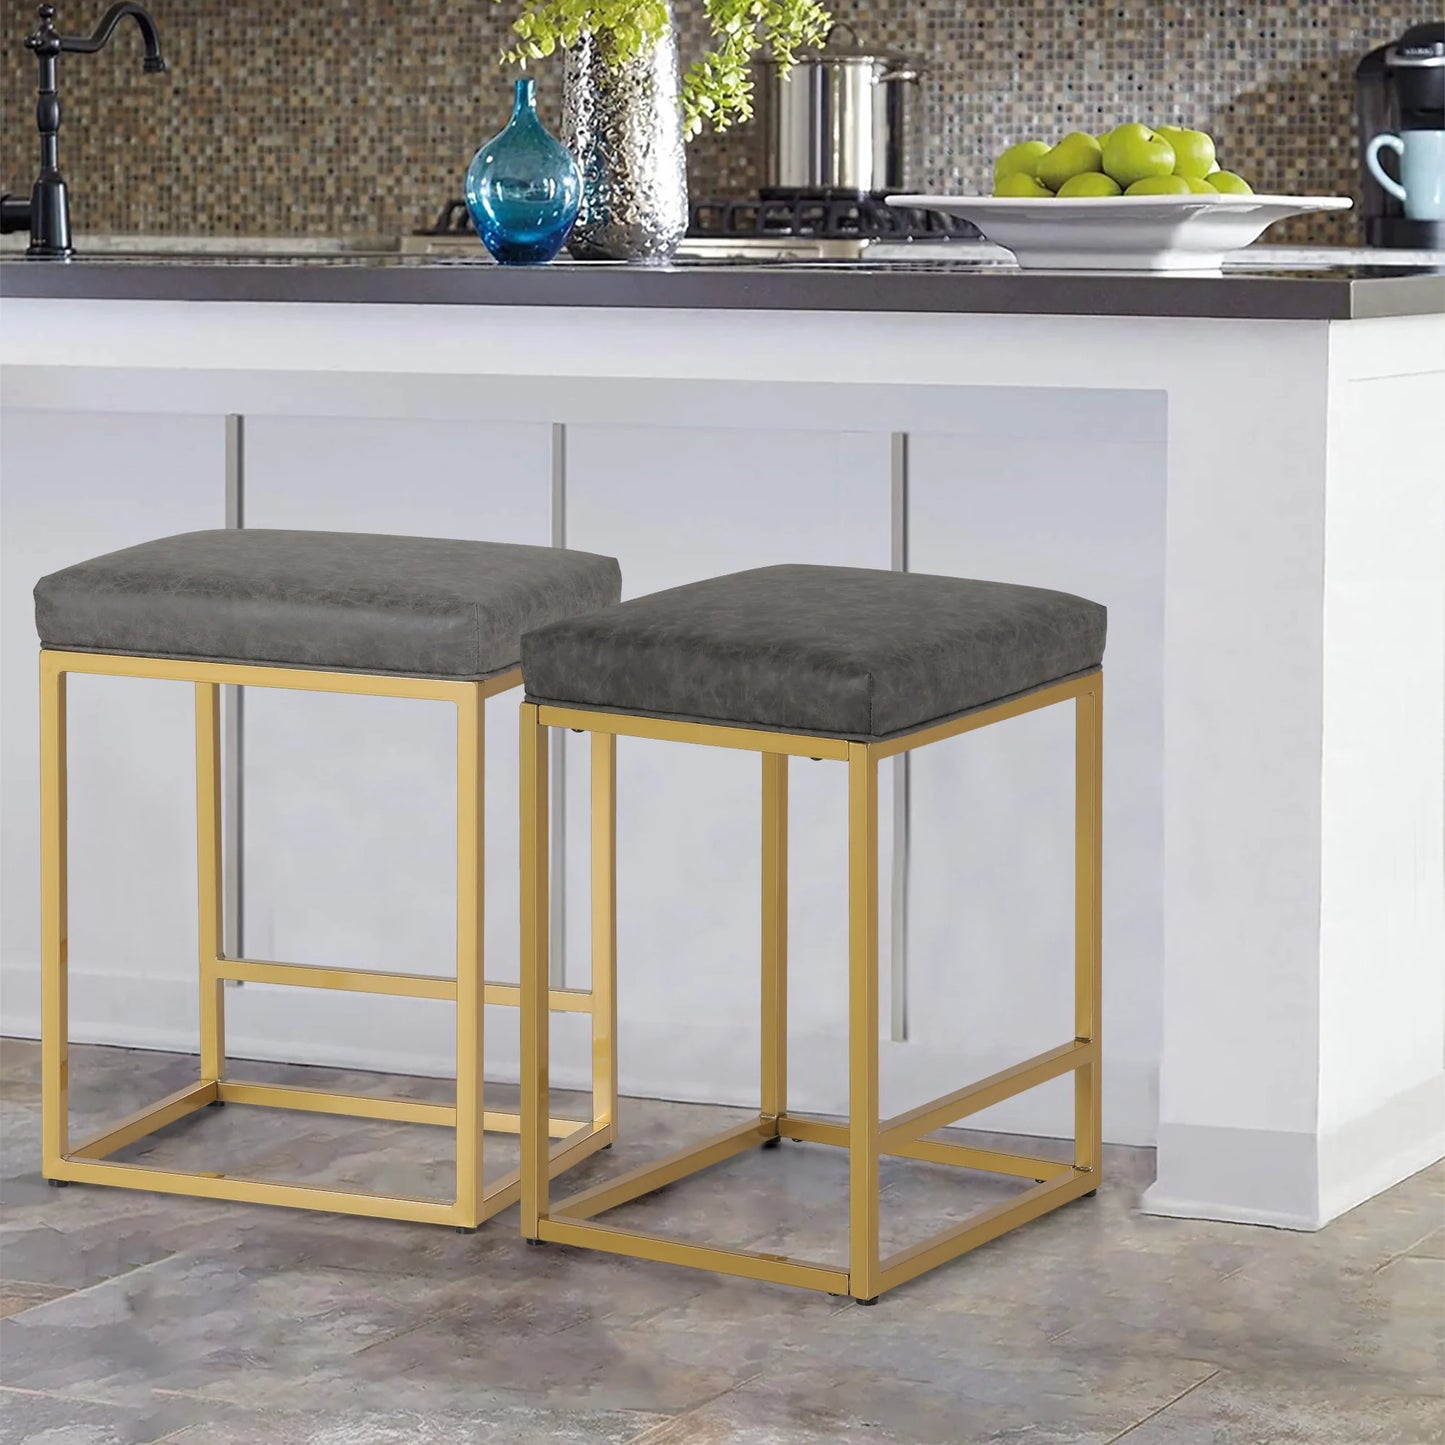 Sophia & William 24" Square Modern PU Leather Bar Stools with Golden Frame-Set of 2-Gray